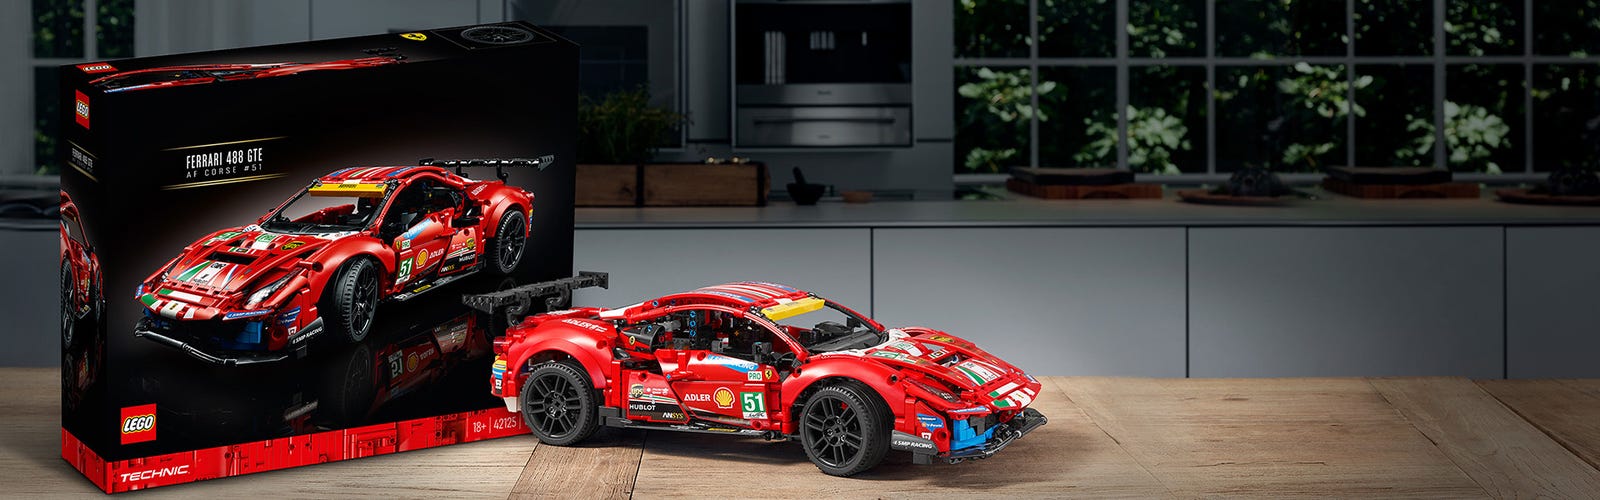 LEGO Technic Ferrari 488 GTE “AF Corse #51” 42125 Super Sports Car  Exclusive Collectible Model Kit, Collectors Set for Adults to Build